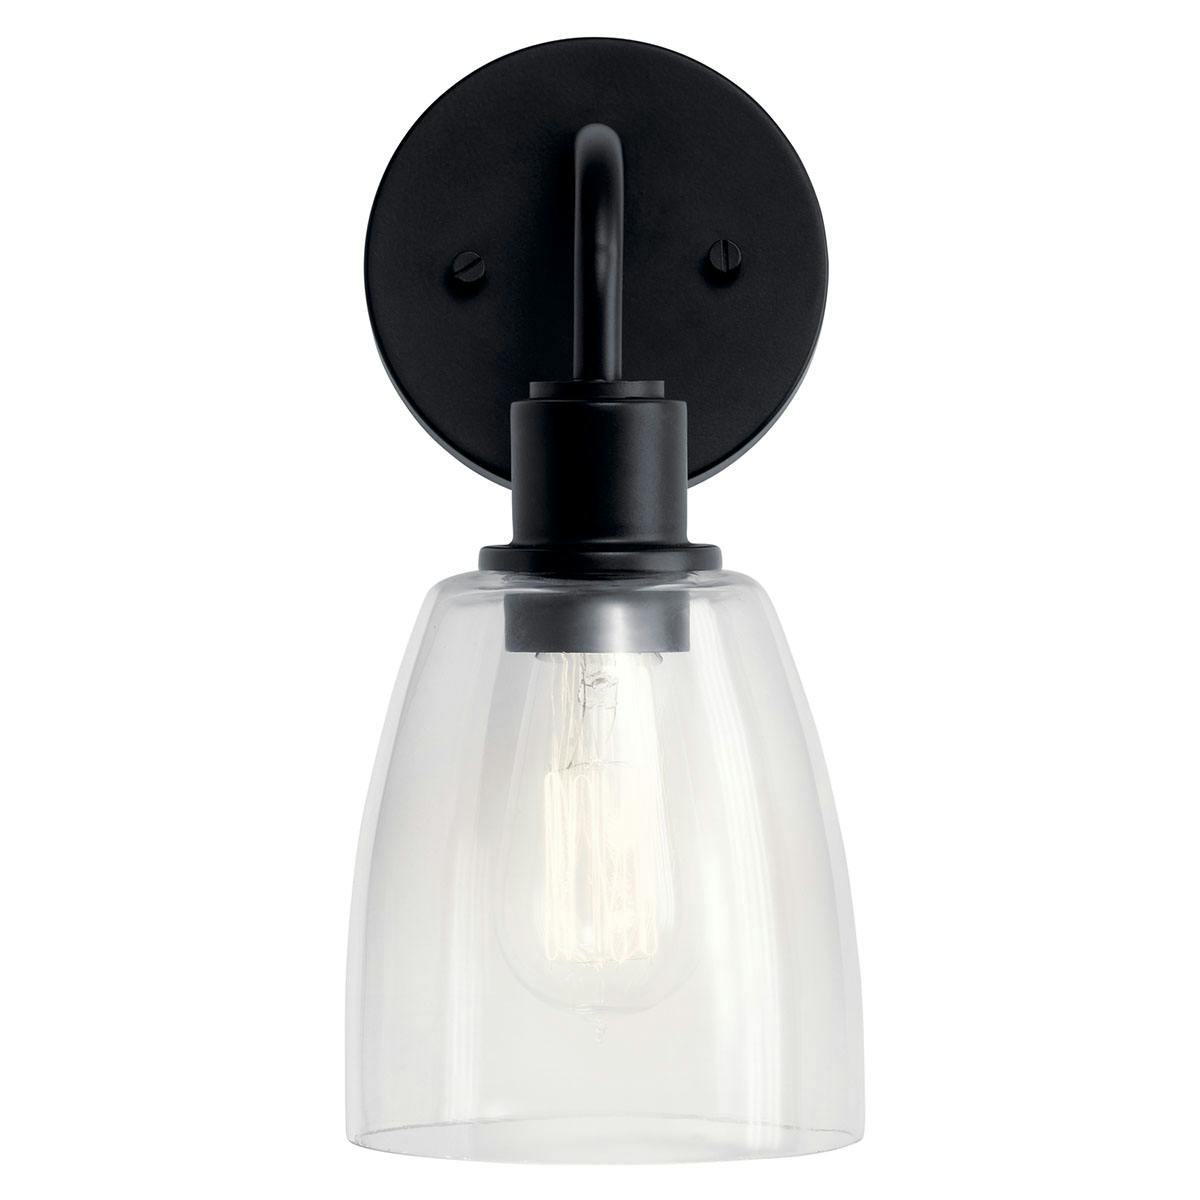 Front view of the Meller 11" 1 Light Sconce Black on a white background